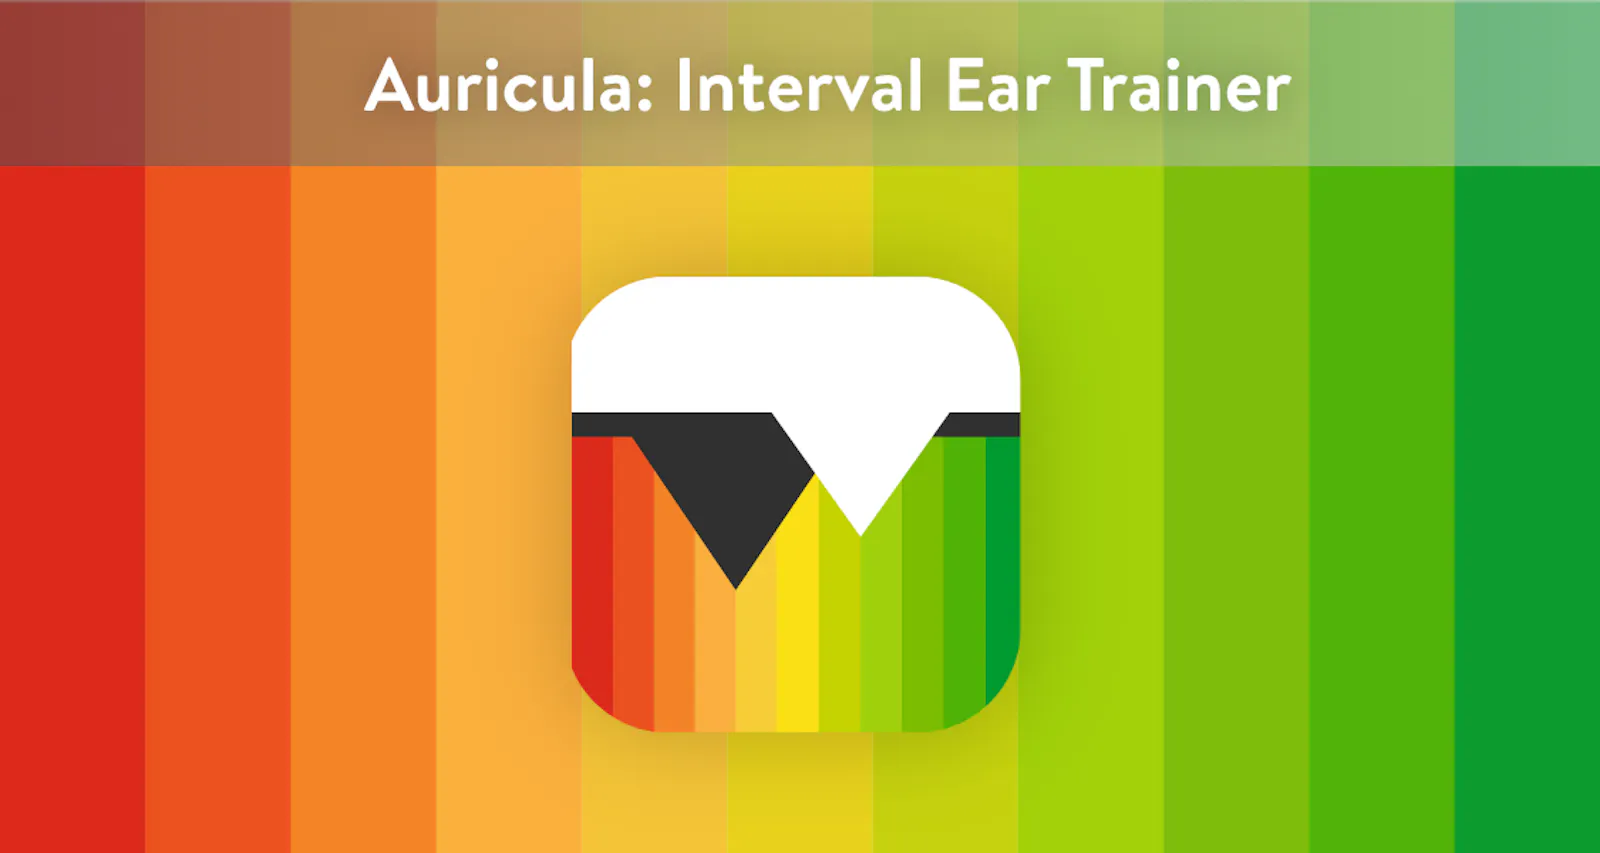 Auricula – Interval Ear Trainer: App icon showing two triangle indicators on rainbow colors.